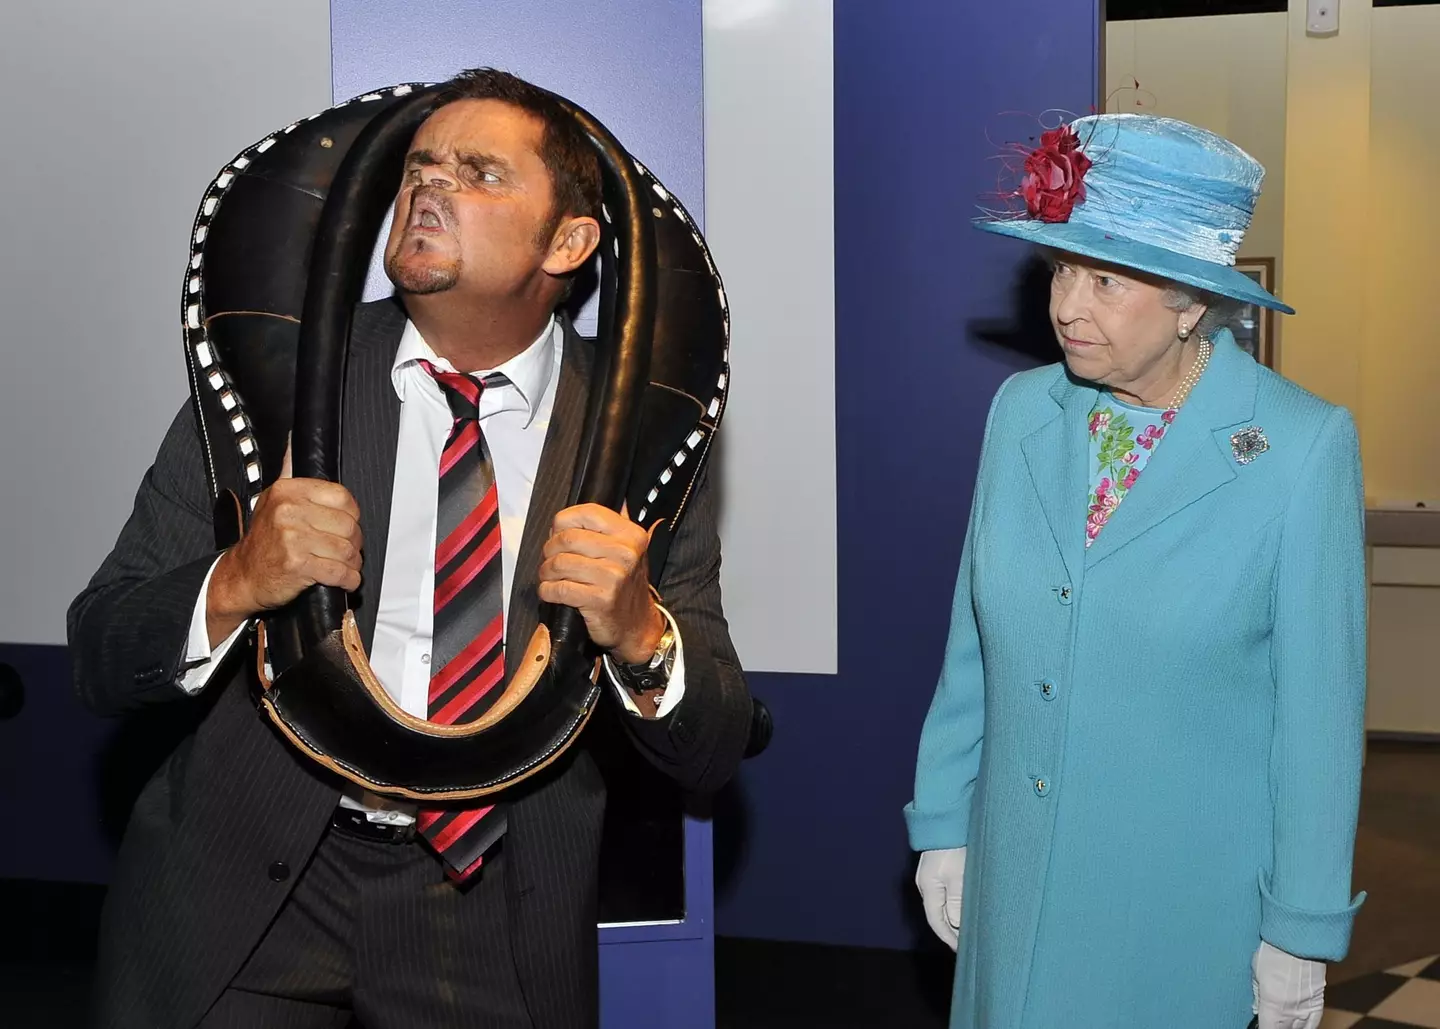 Queen Elizabeth II and the king of gurning.